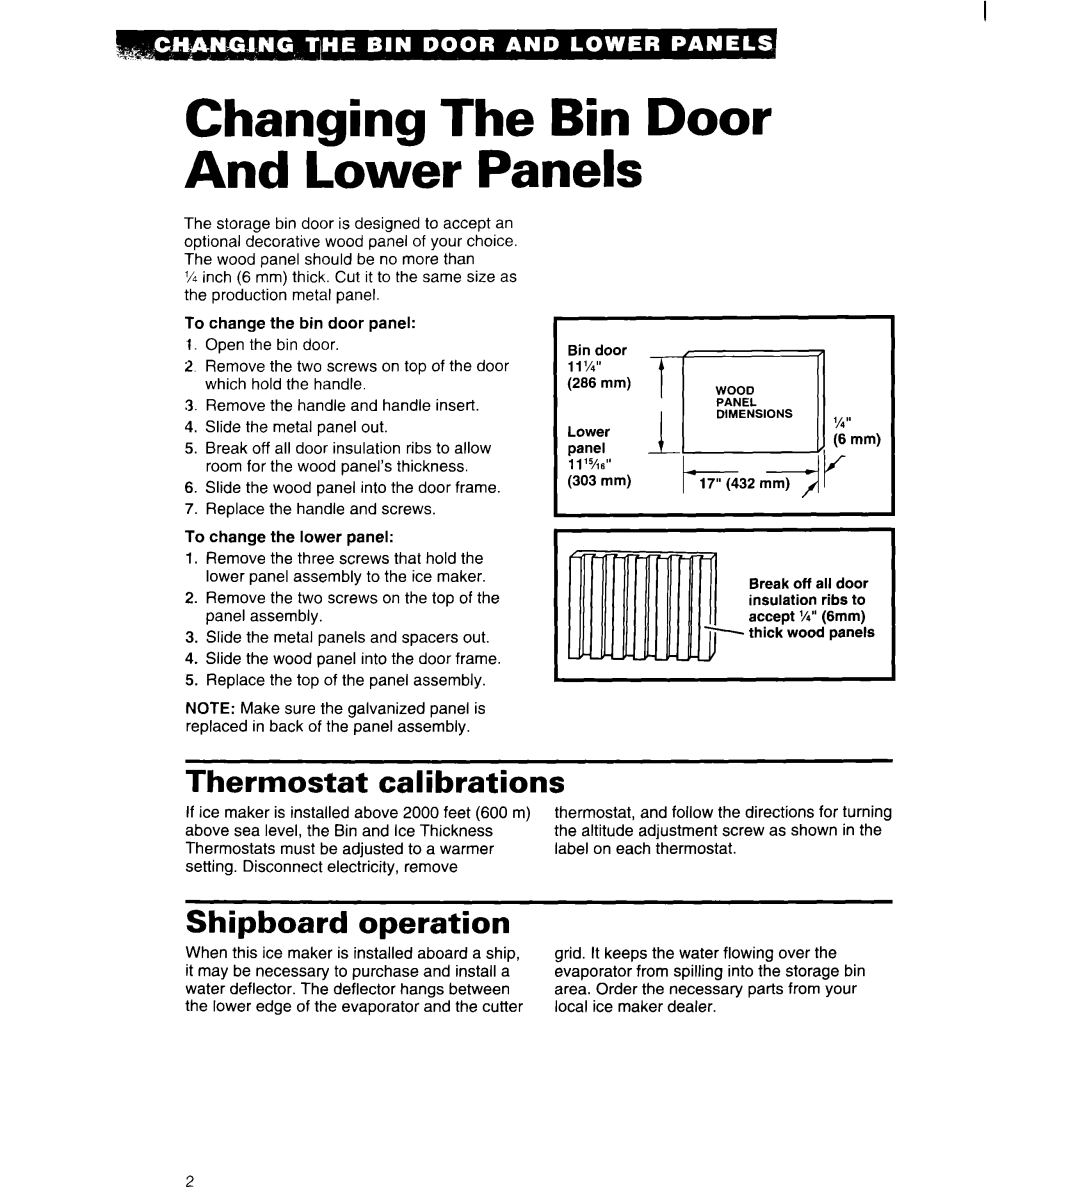 Whirlpool 2180913 manual Changing The Bin Door And Lower Panels, Thermostat calibrations, Shipboard operation 